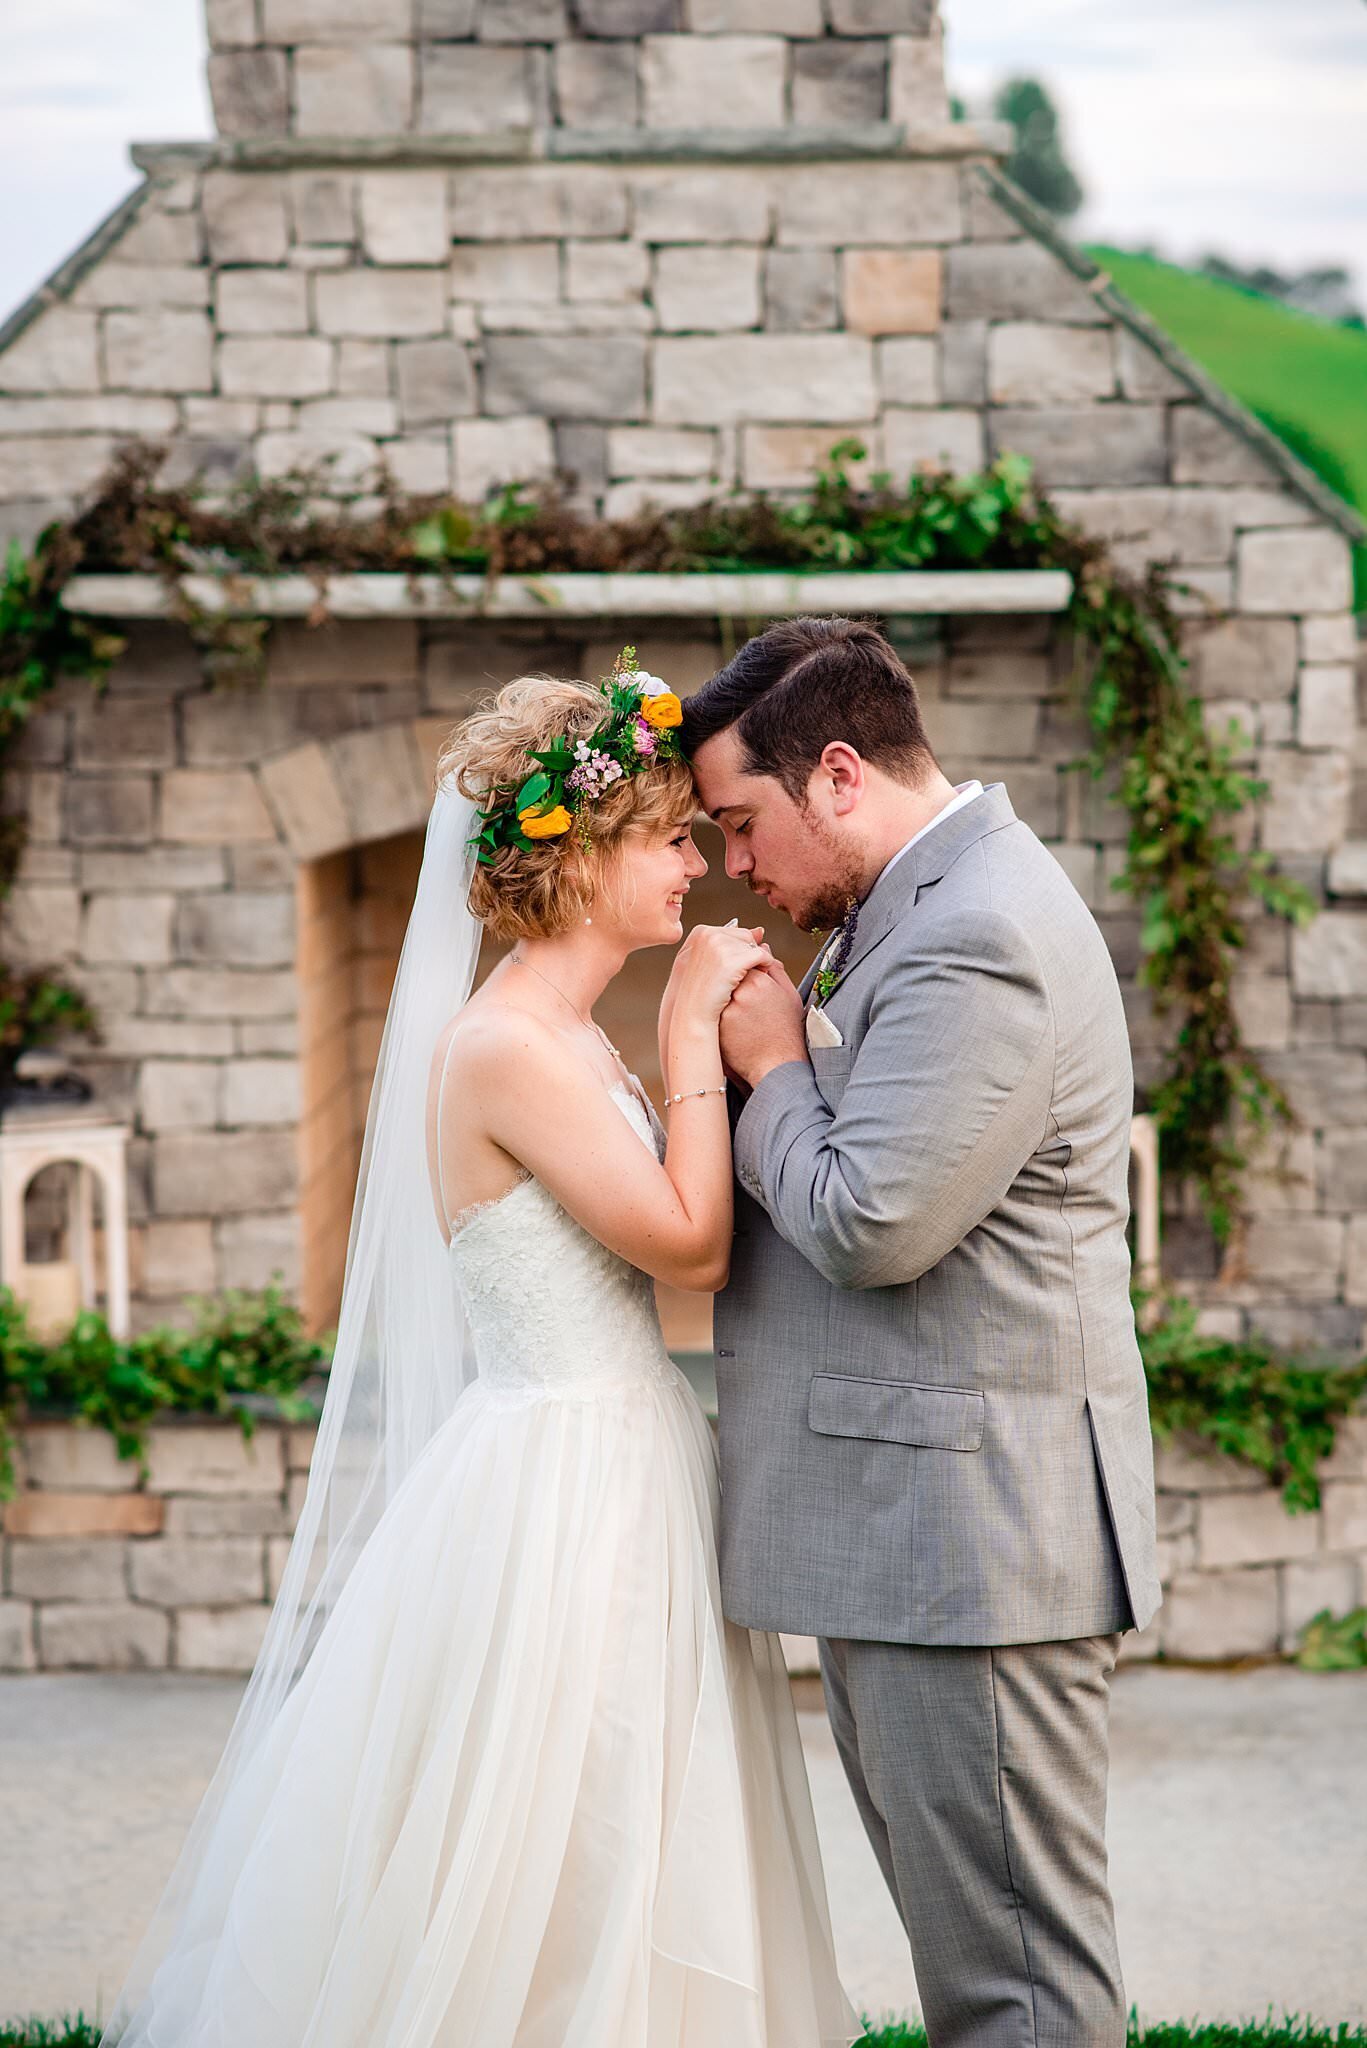 Newlyweds whispering to one another on the hillside of White Dove Barn in front of the outdoor fireplace, she is wearing a flower crown